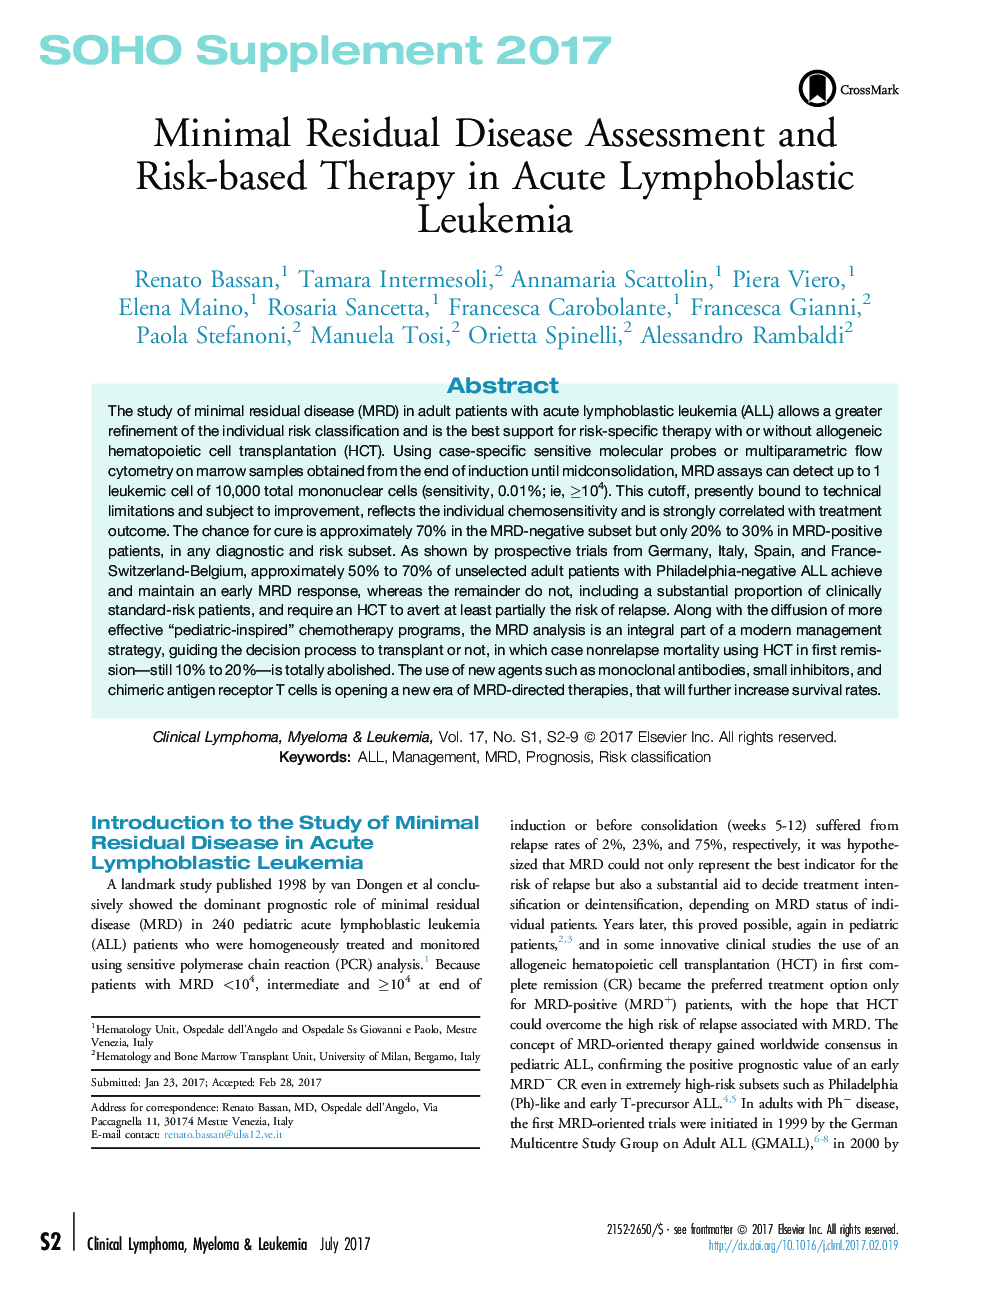 SOHO Supplement 2017Minimal Residual Disease Assessment and Risk-based Therapy in Acute Lymphoblastic Leukemia